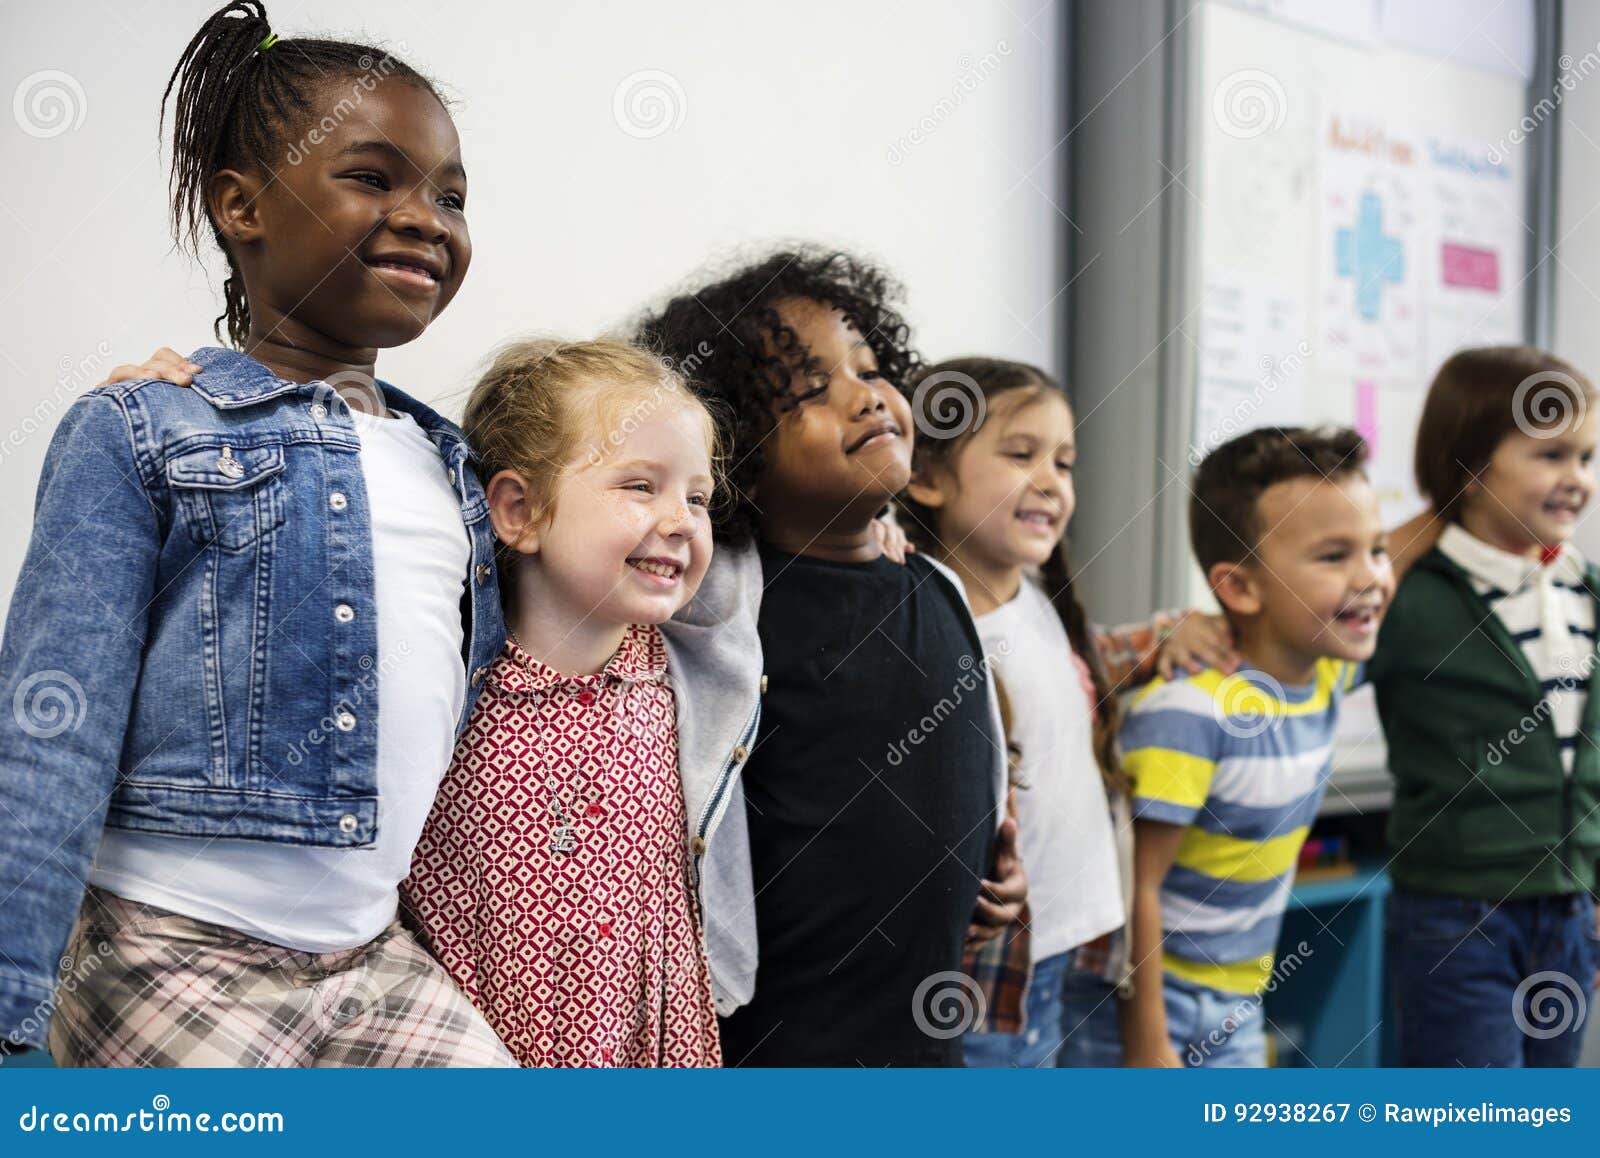 group of diverse kindergarten students standing together in classroom